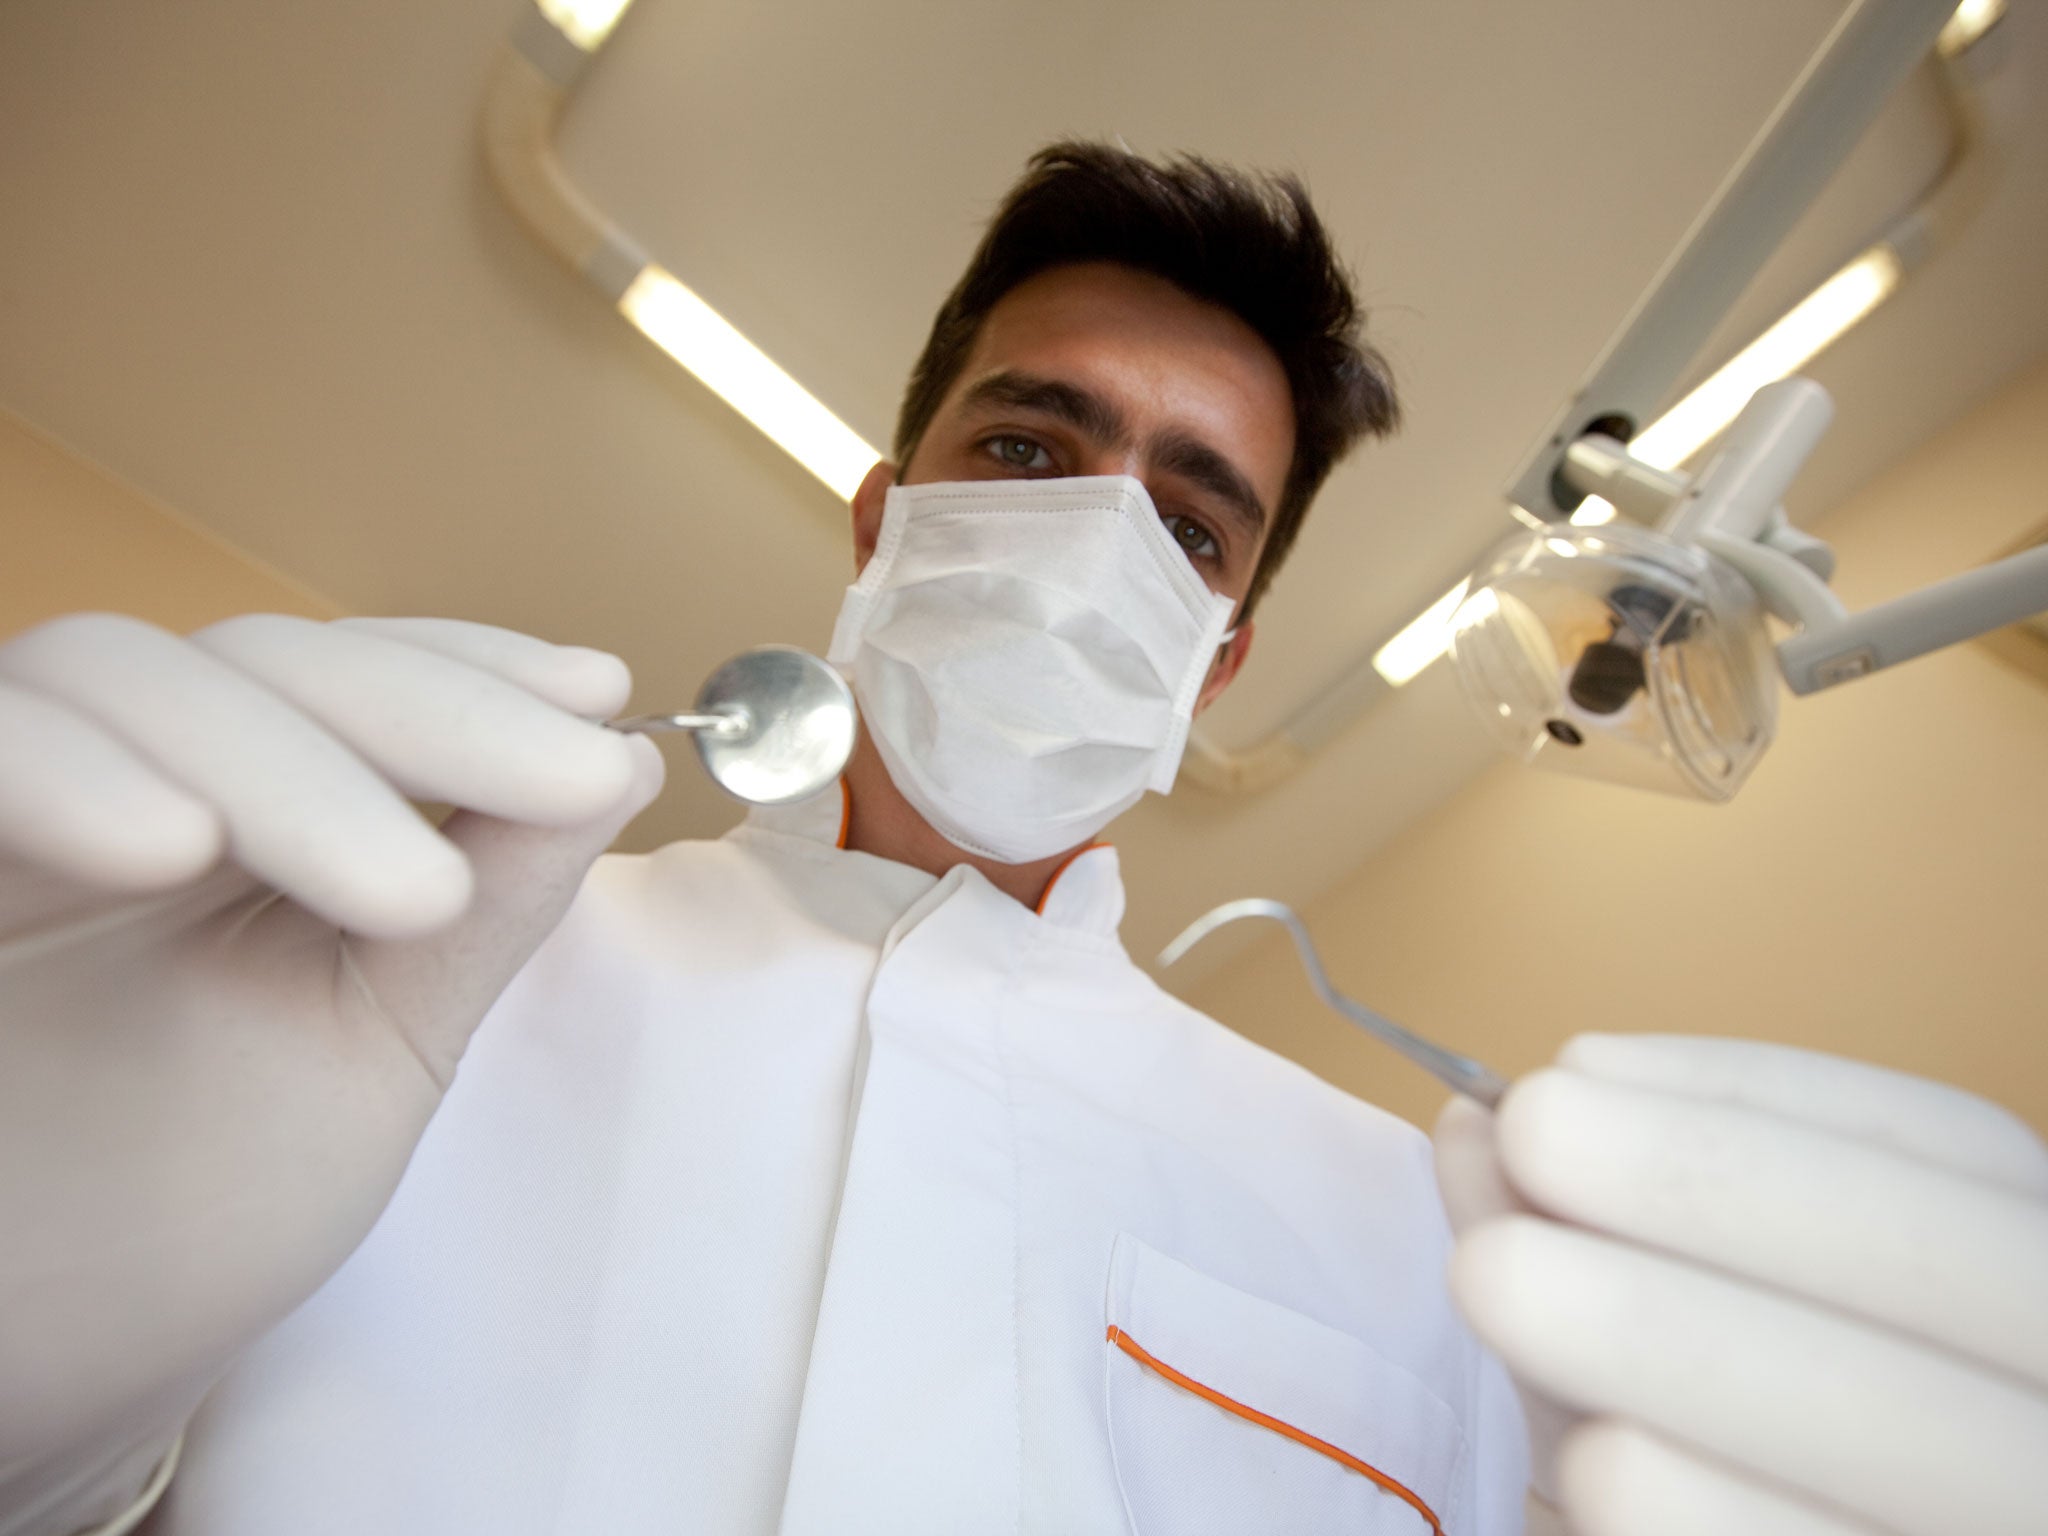 Good news for patients who dread the dentist's needle